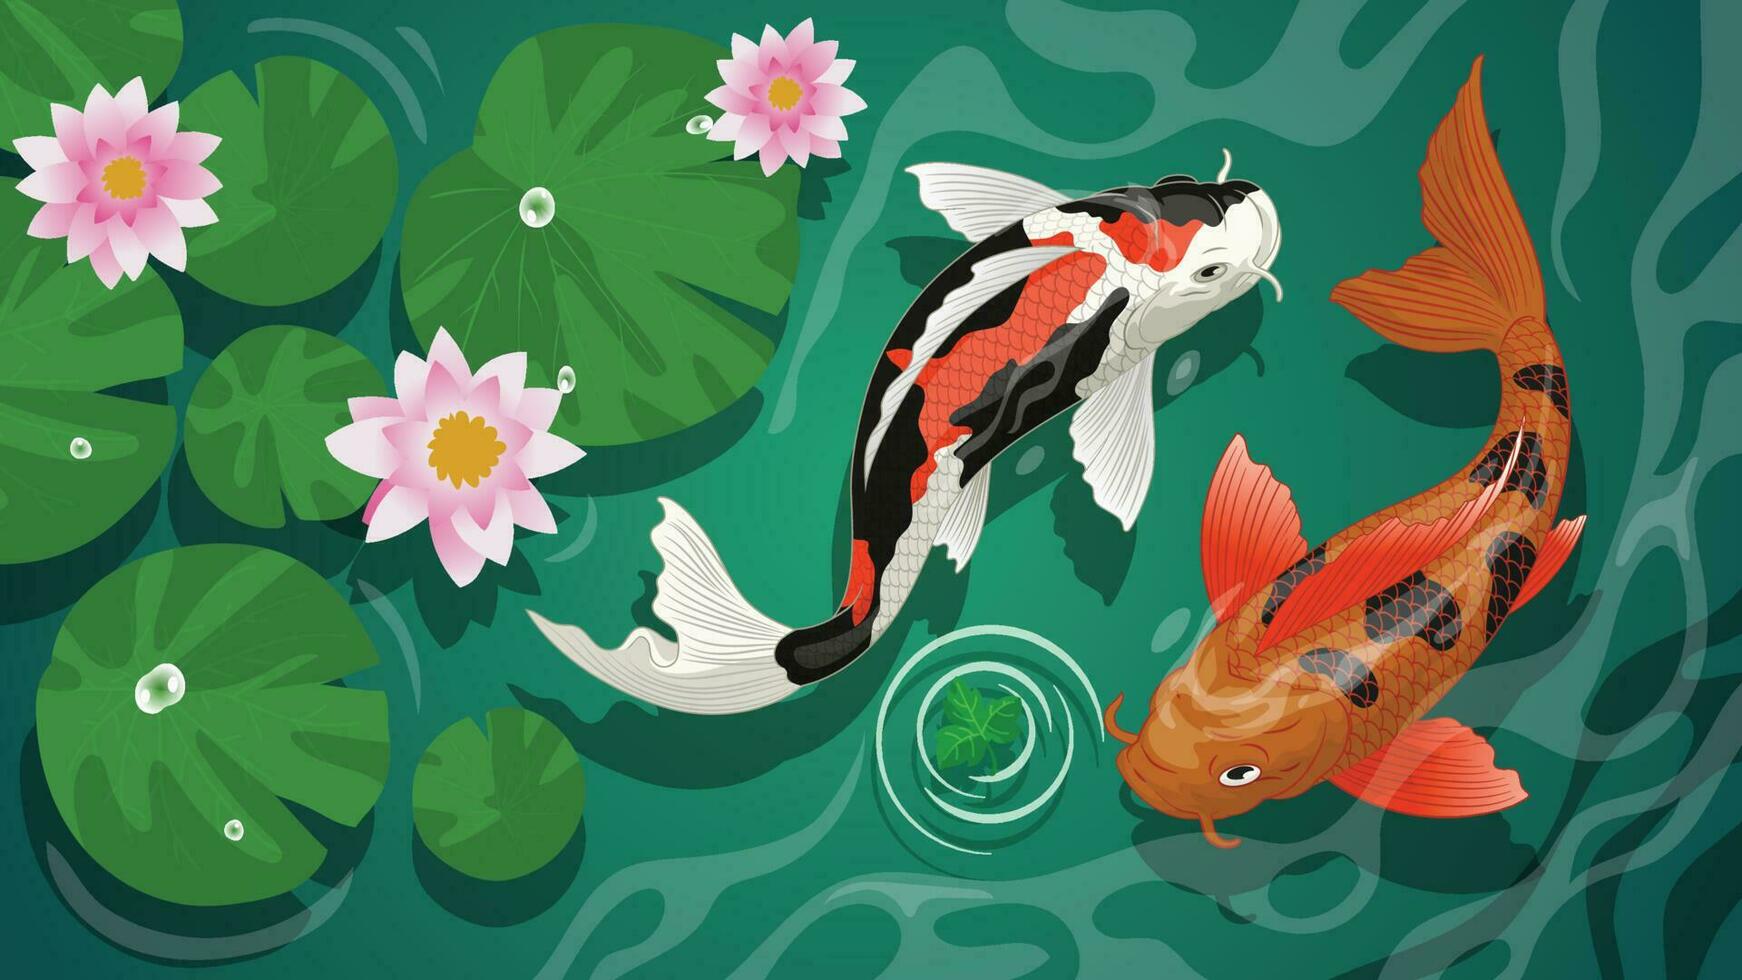 koi fishes swiming in the pond vector